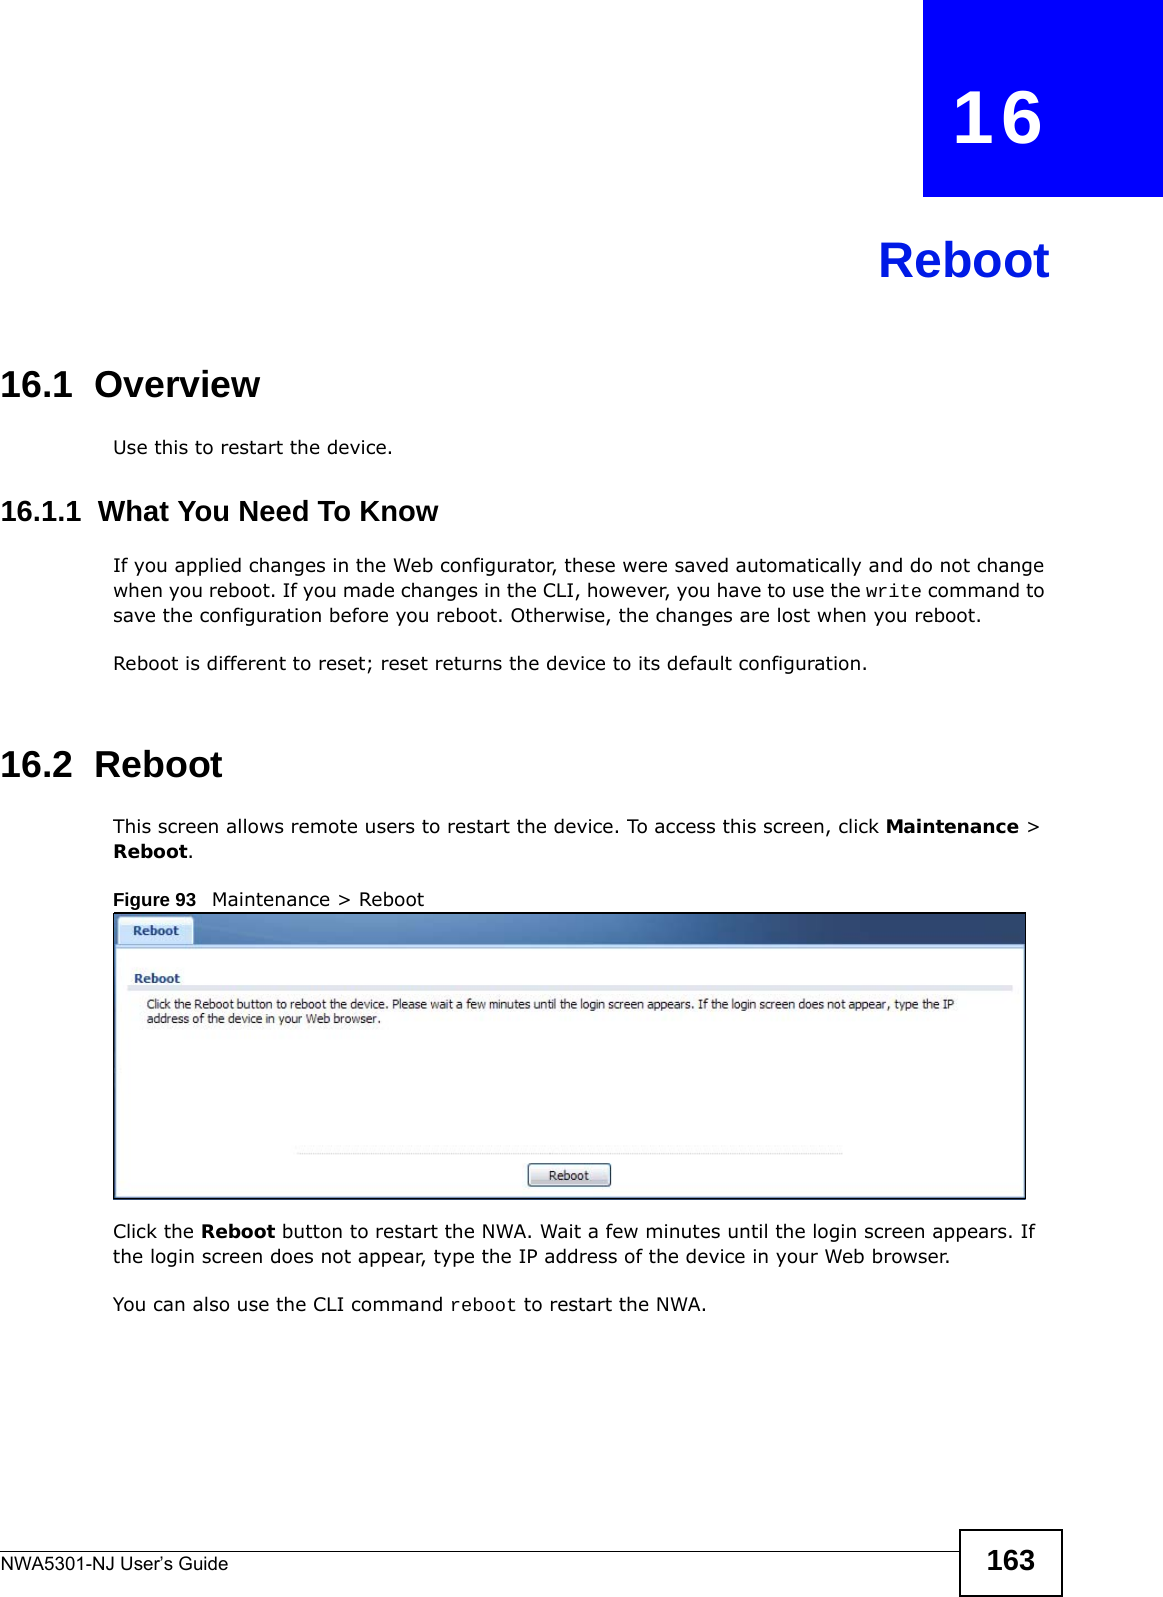 NWA5301-NJ User’s Guide 163CHAPTER   16Reboot16.1  OverviewUse this to restart the device.16.1.1  What You Need To KnowIf you applied changes in the Web configurator, these were saved automatically and do not change when you reboot. If you made changes in the CLI, however, you have to use the write command to save the configuration before you reboot. Otherwise, the changes are lost when you reboot.Reboot is different to reset; reset returns the device to its default configuration.16.2  RebootThis screen allows remote users to restart the device. To access this screen, click Maintenance &gt; Reboot.Figure 93   Maintenance &gt; RebootClick the Reboot button to restart the NWA. Wait a few minutes until the login screen appears. If the login screen does not appear, type the IP address of the device in your Web browser.You can also use the CLI command reboot to restart the NWA.